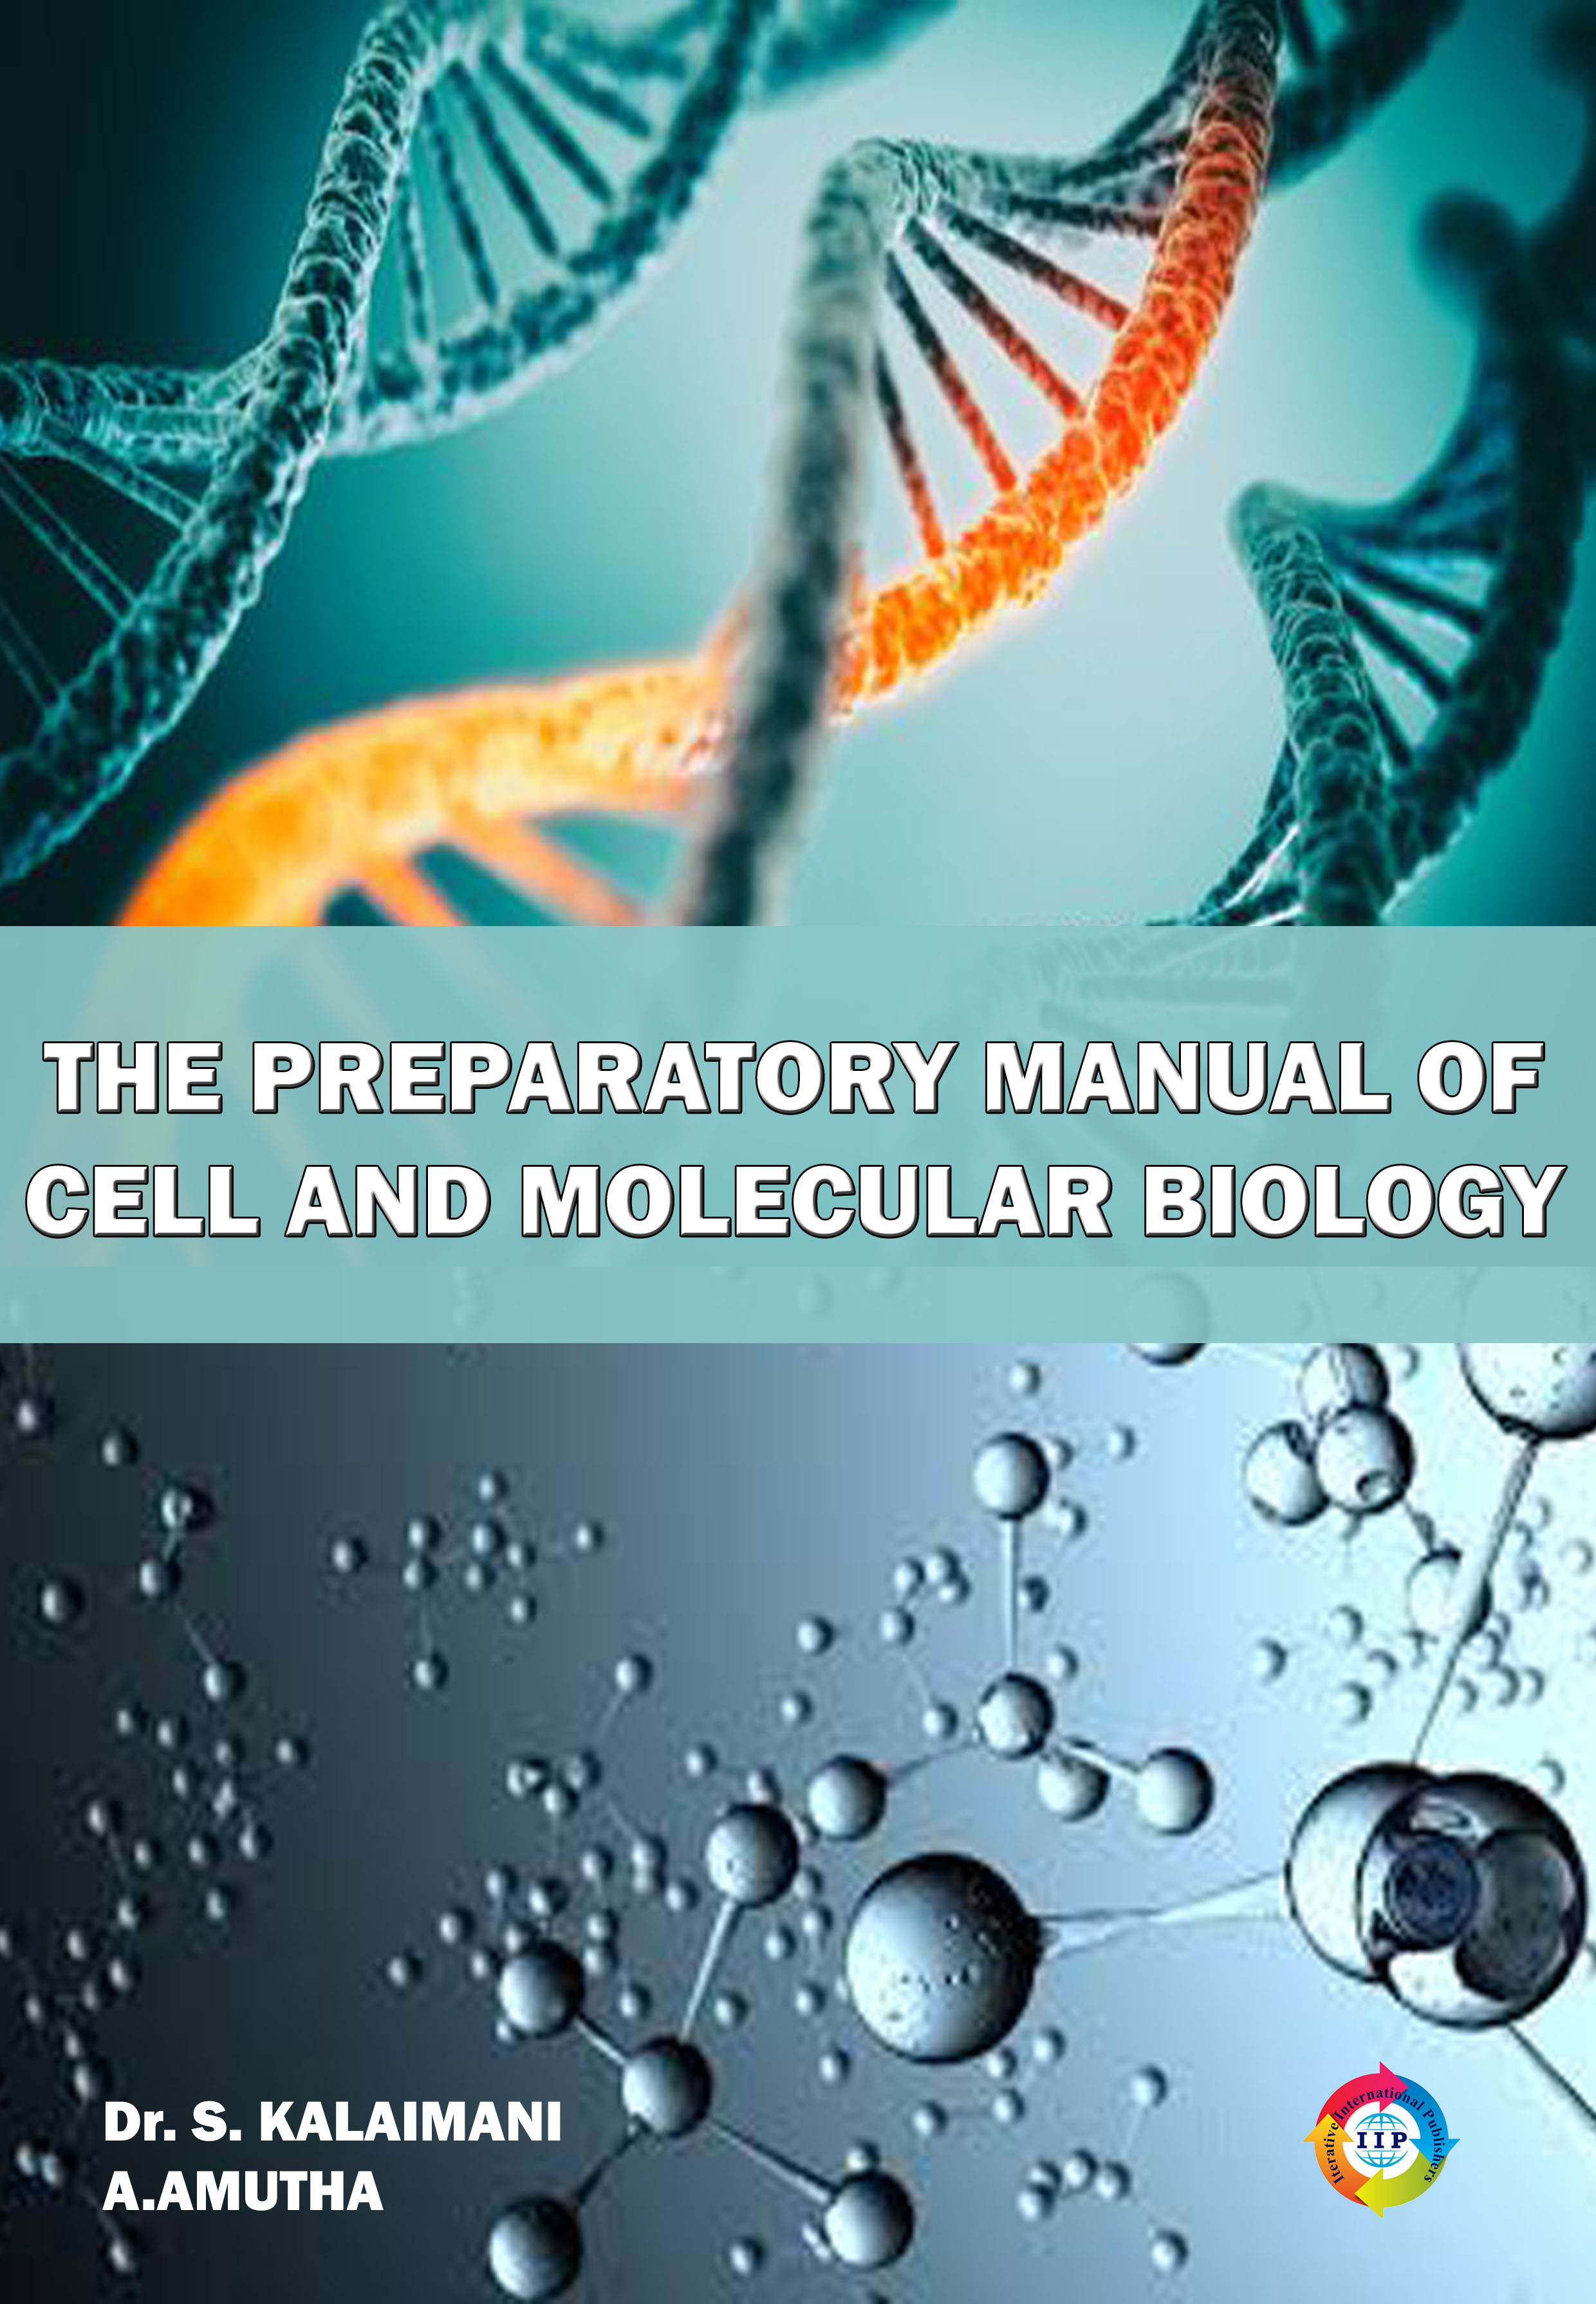 THE PREPARATORY MANUAL OF CELL AND MOLECULAR BIOLOGY